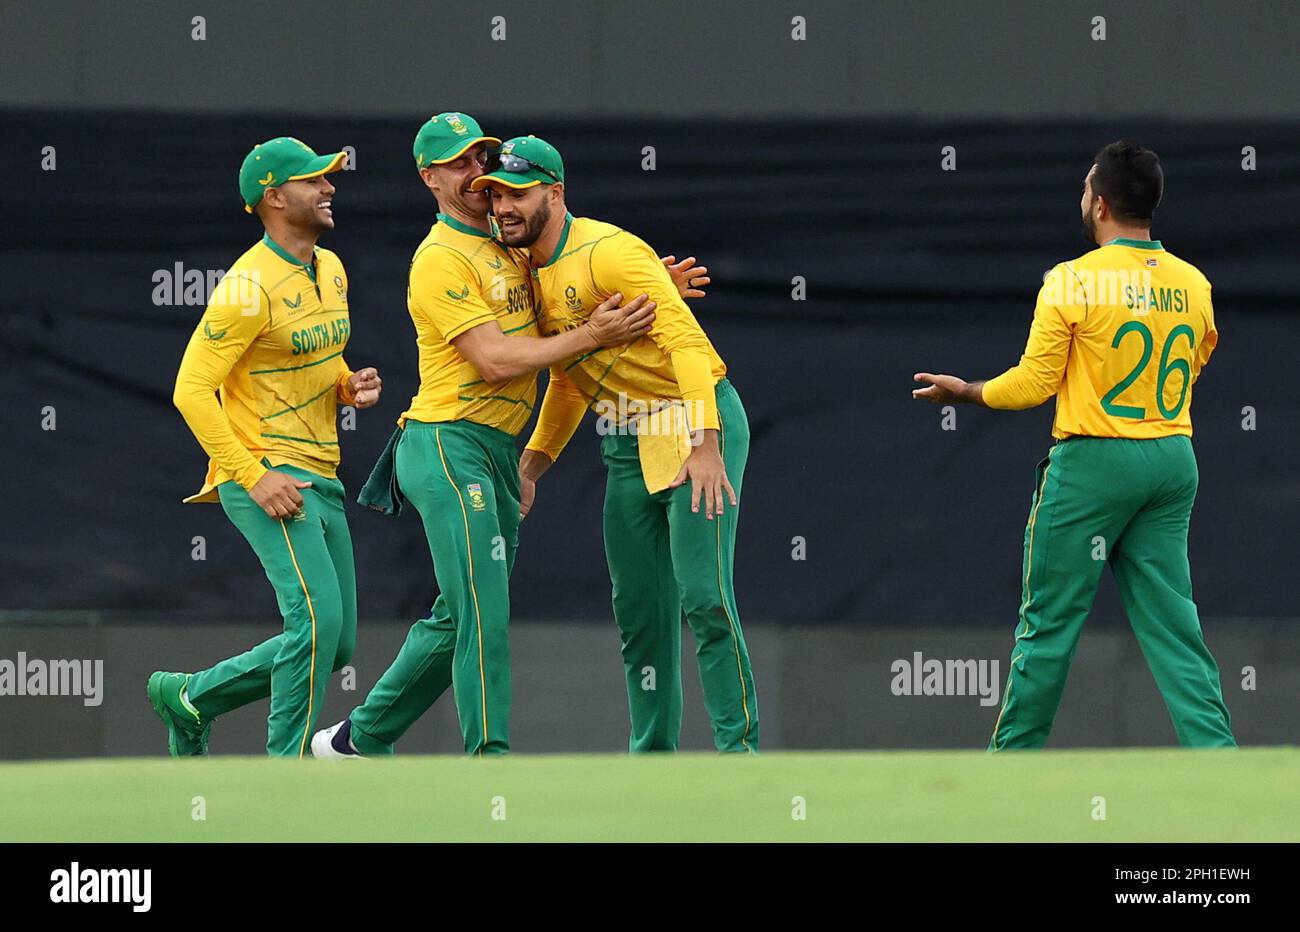 Cricket - First Twenty20 - South Africa v West Indies - SuperSport Park Cricket Stadium, Centurion, South Africa - March 25, 2023 South Africa's Anrich Nortje celebrates after taking a catch to dismiss West Indies' Johnson Charles off the bowling of Tabraiz Shamsi REUTERS/Siphiwe Sibeko Stock Photo